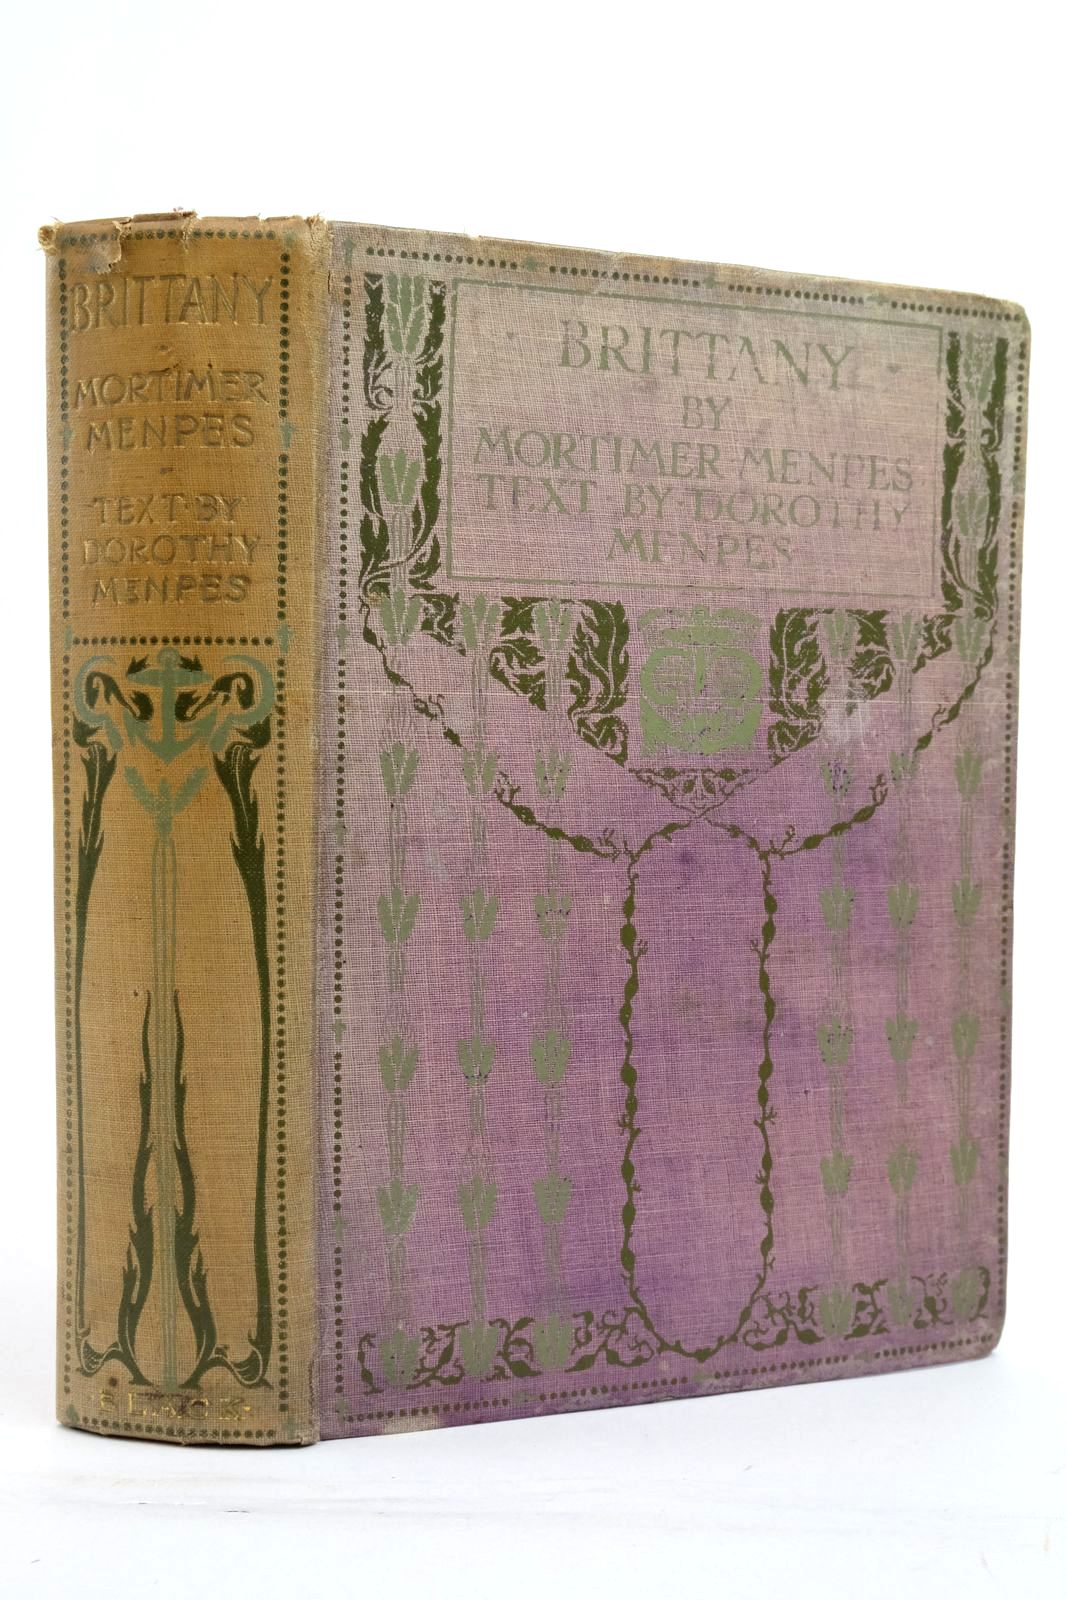 Photo of BRITTANY written by Menpes, Dorothy illustrated by Menpes, Mortimer published by Adam & Charles Black (STOCK CODE: 2137520)  for sale by Stella & Rose's Books